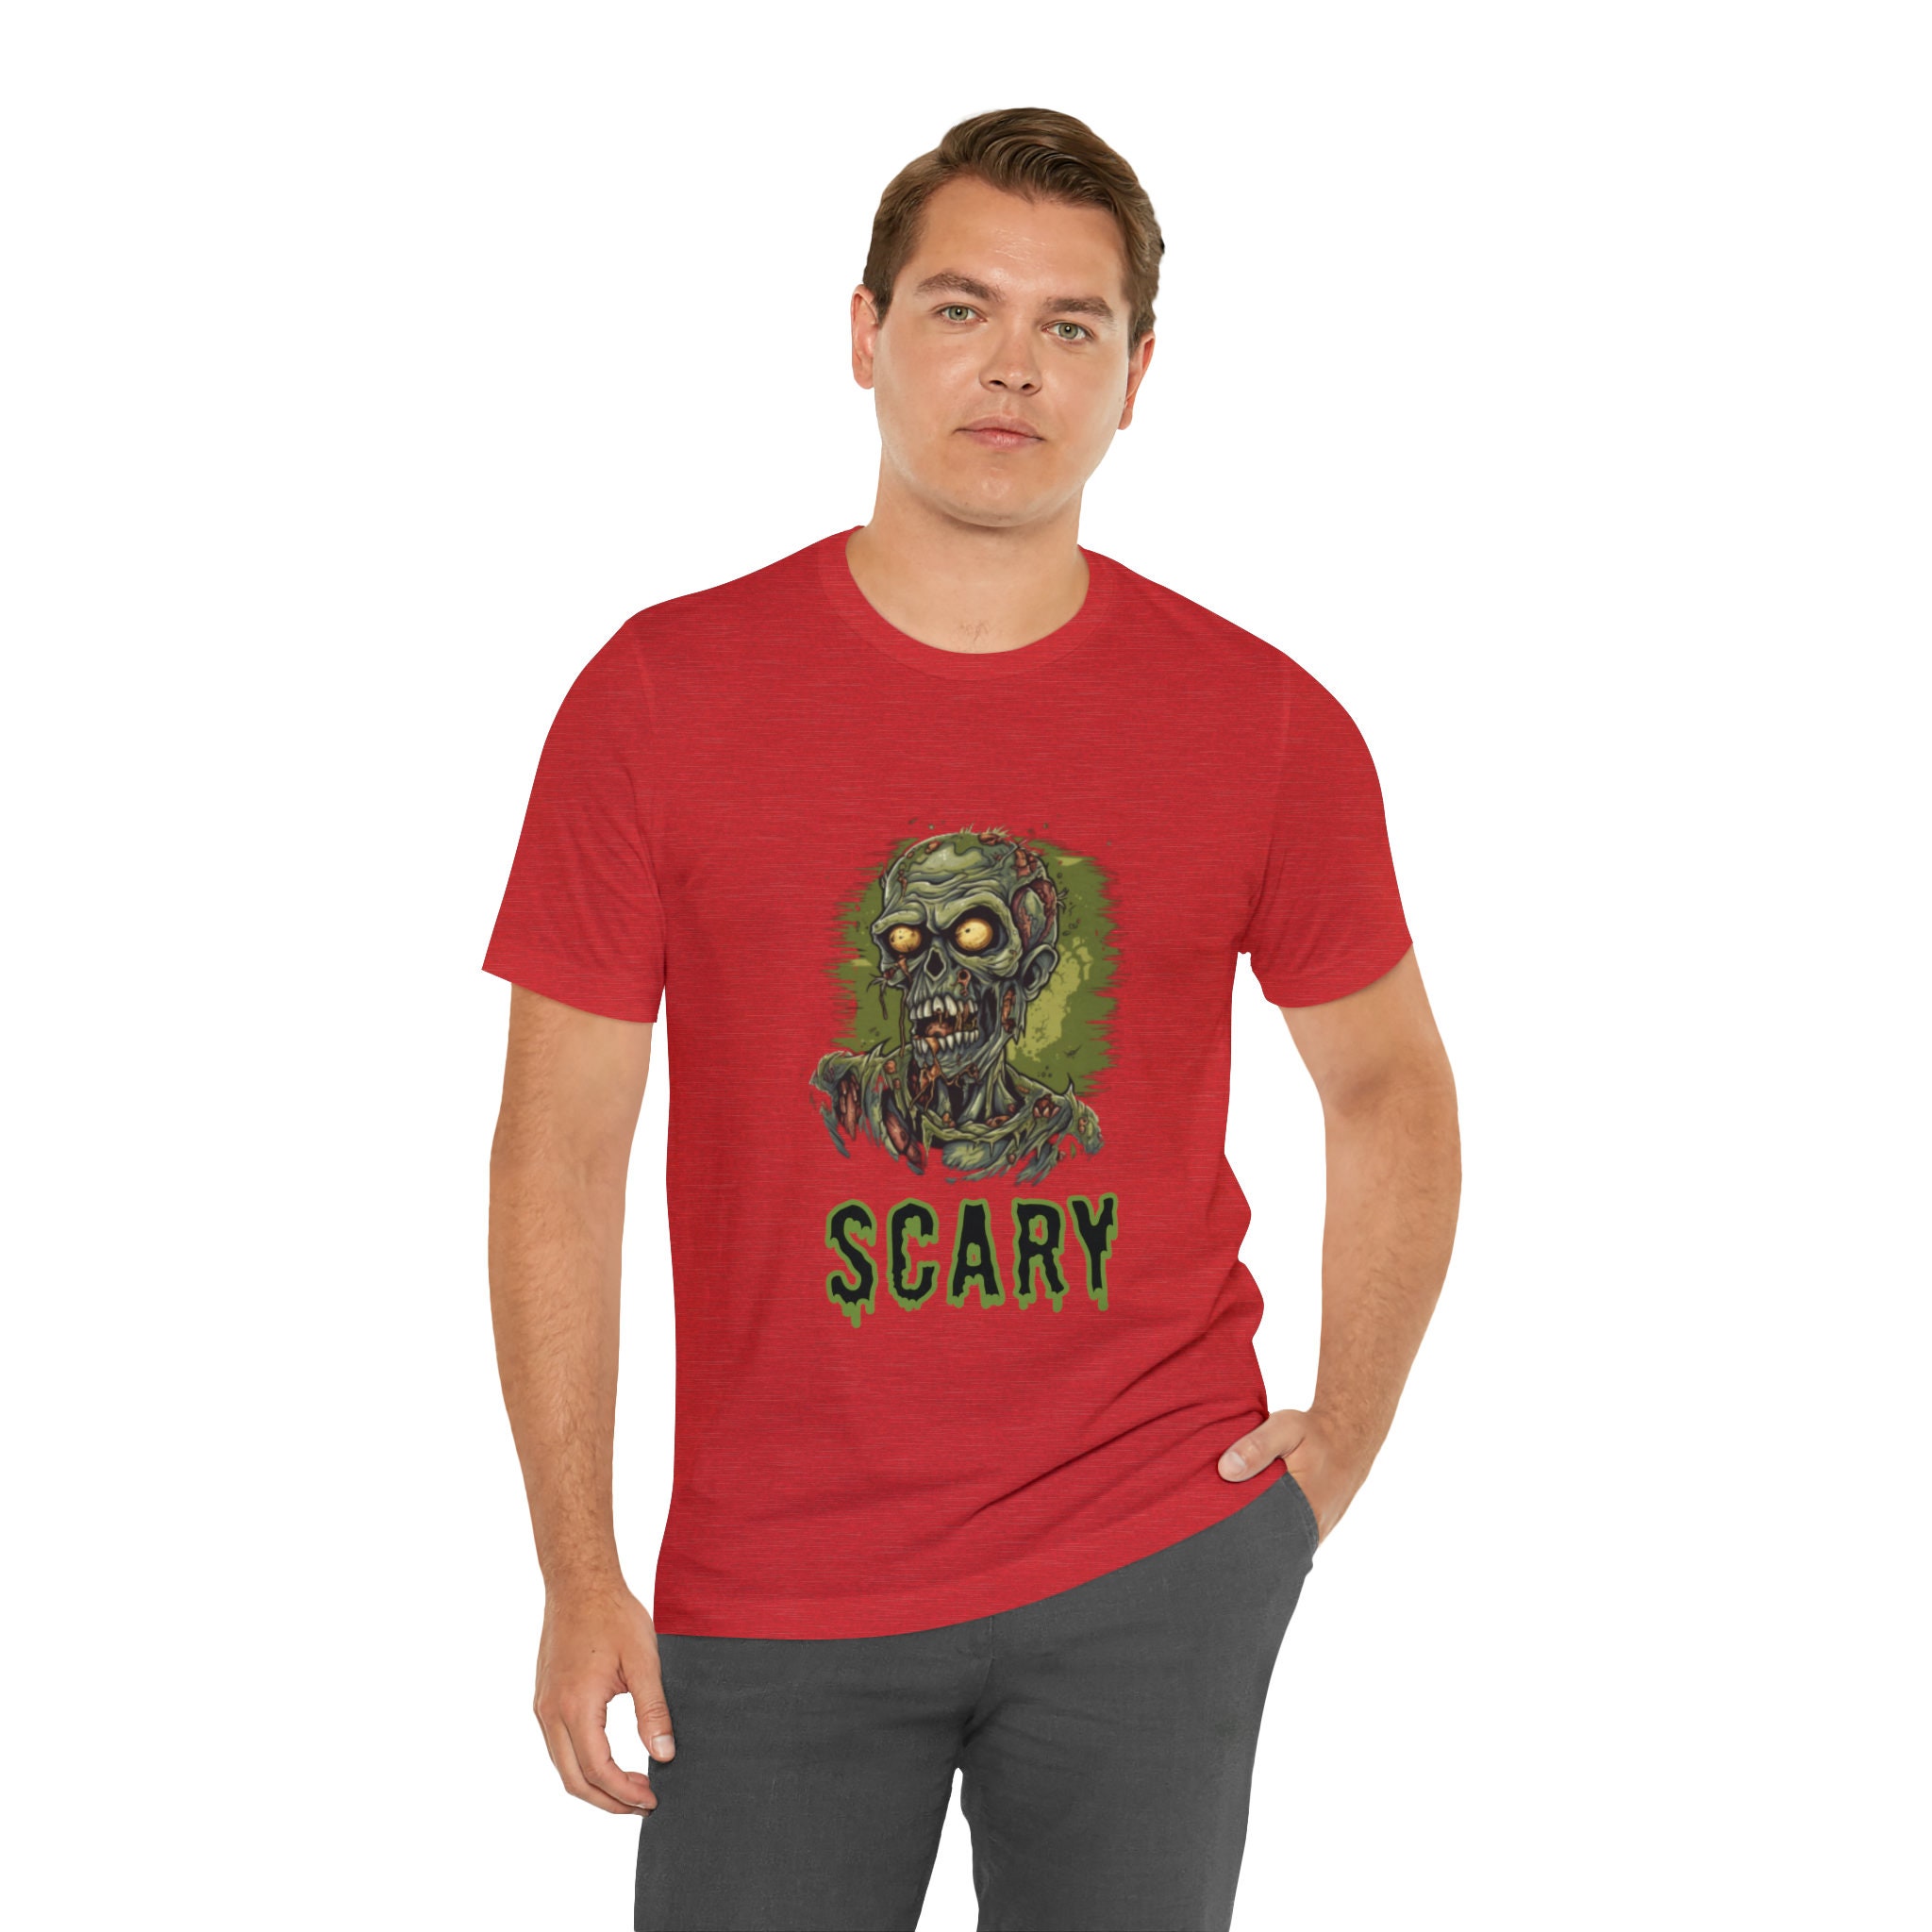 Discover Zombie Apocalypse Mens T-shirt,Halloween,Horror,geek,geeky shirt,Dead Shirt,scary t shirt,gift,Comic,Zombie Gift,Trick Or Treat Shirt,spooky